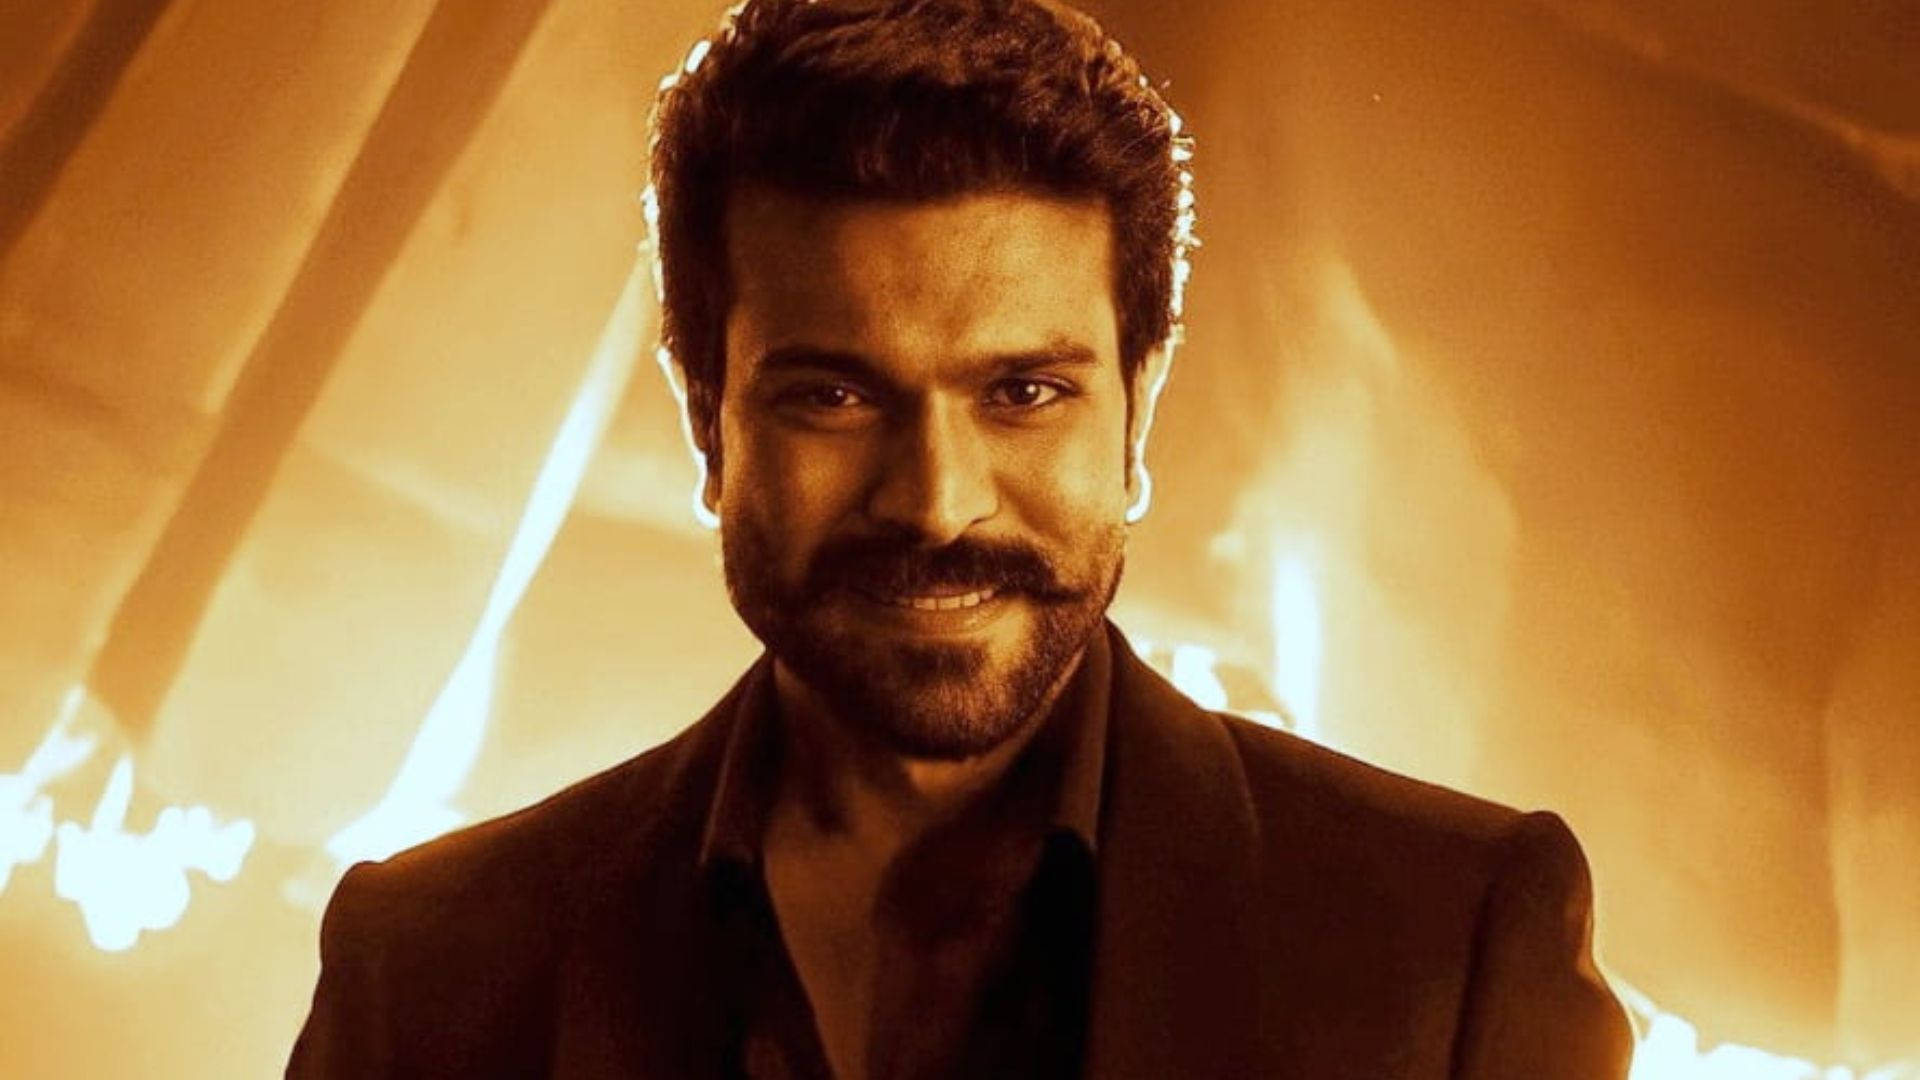 Ram Charan In High Definition Looking Dashing Against A Fiery Background Background